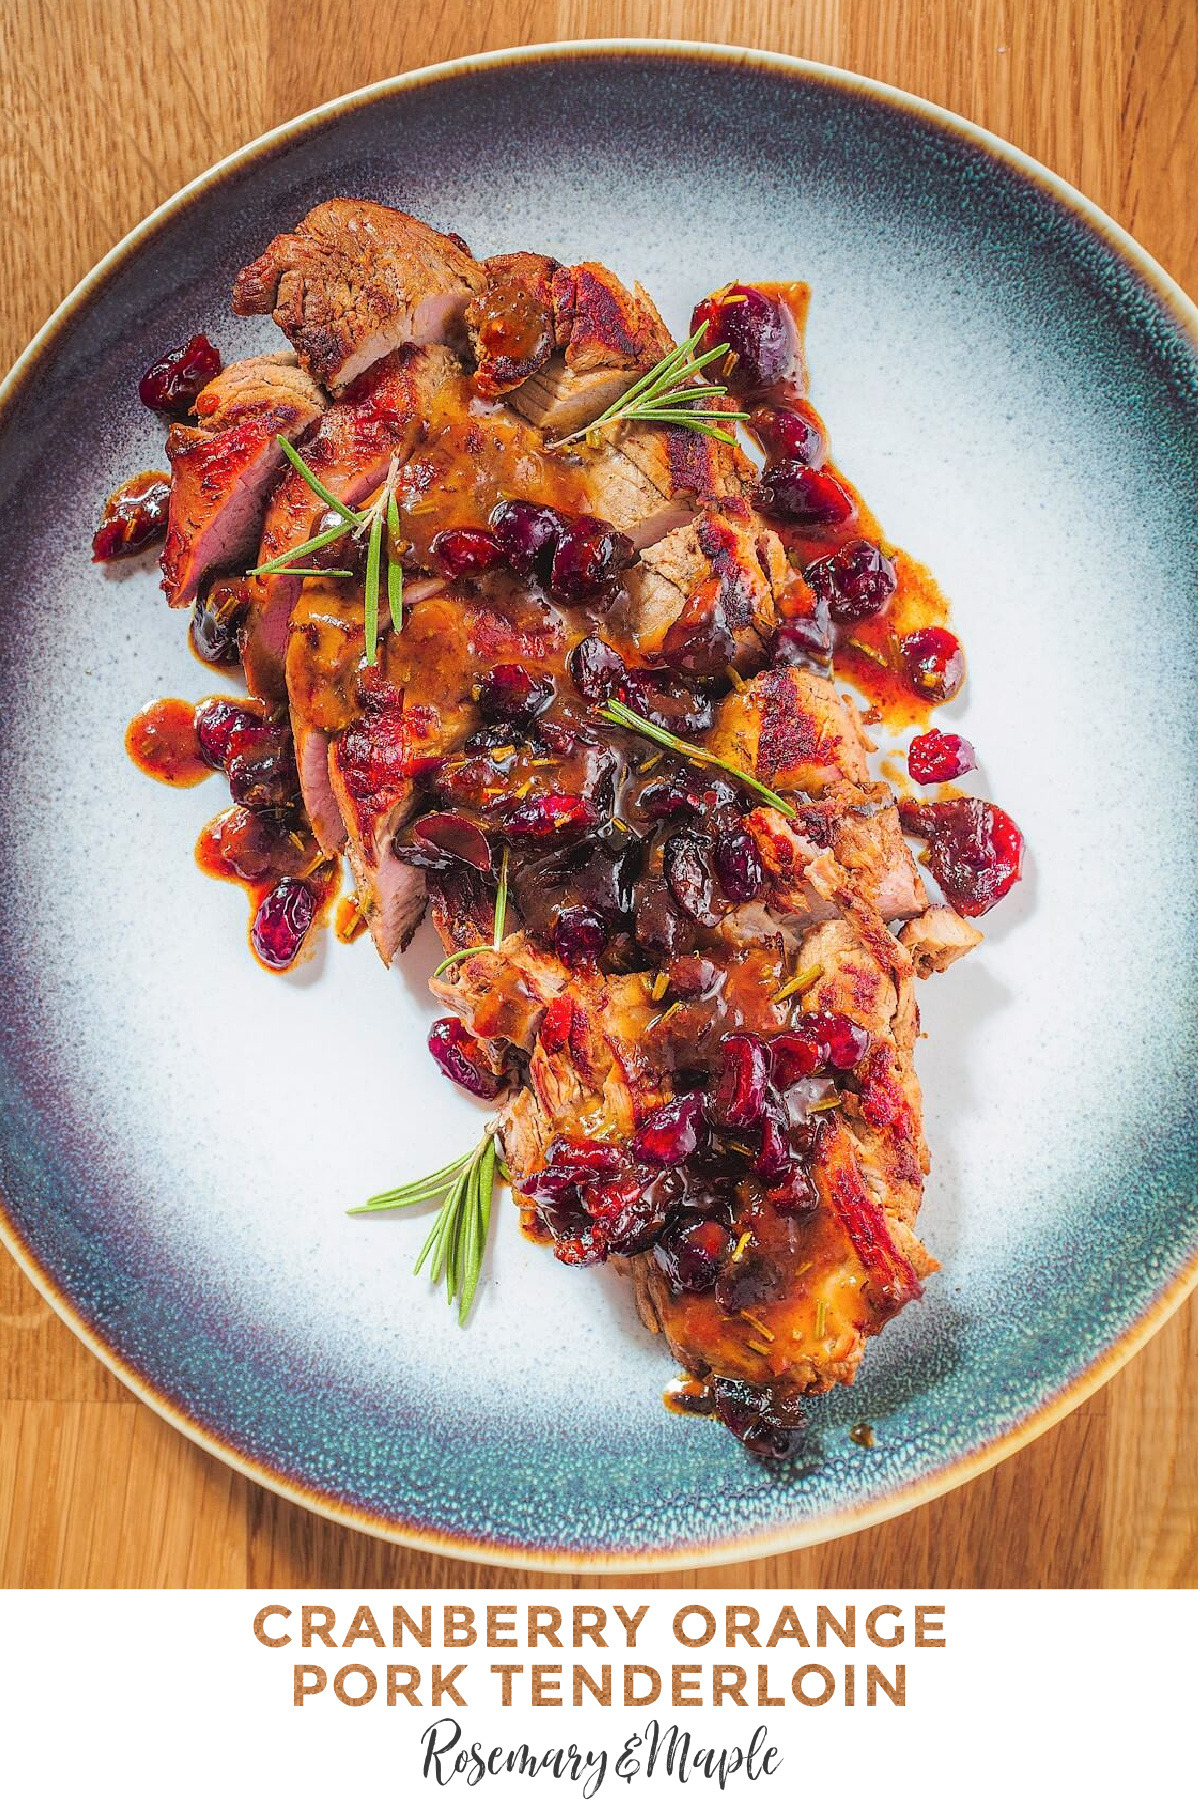 A quick and easy recipe for delicious Cranberry Orange Pork Tenderloin that is sure to become a new favorite. It's the perfect holiday meal.